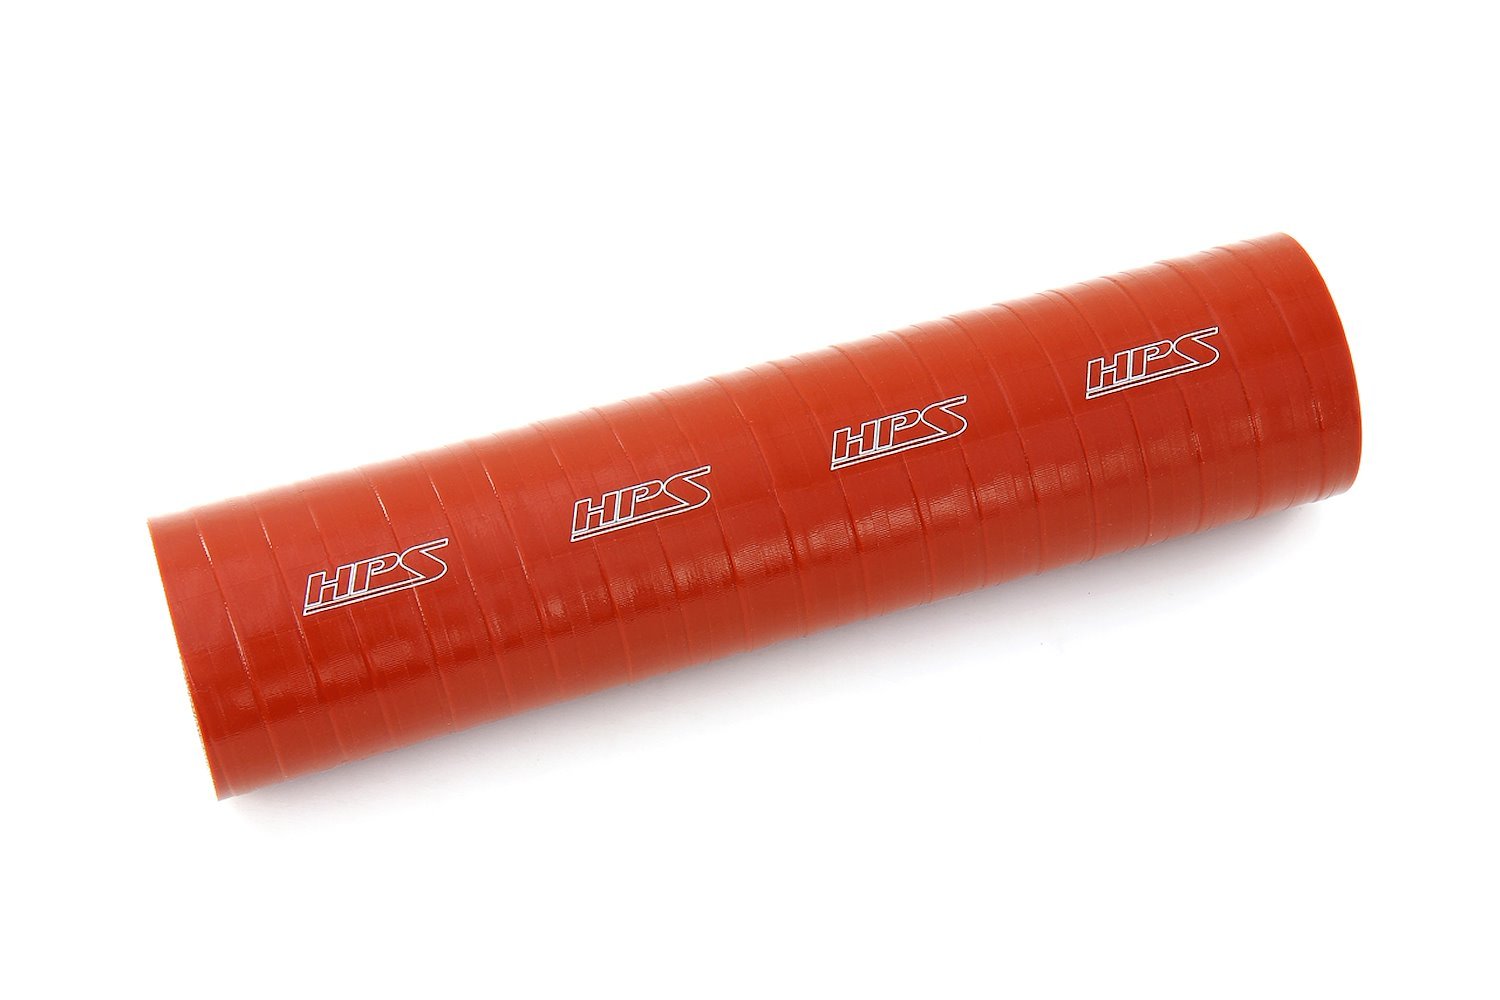 ST-087-HOT Silicone Coupler Hose, Ultra High-Temp 4-Ply Reinforced, 7/8 in. ID, 1 ft. Long